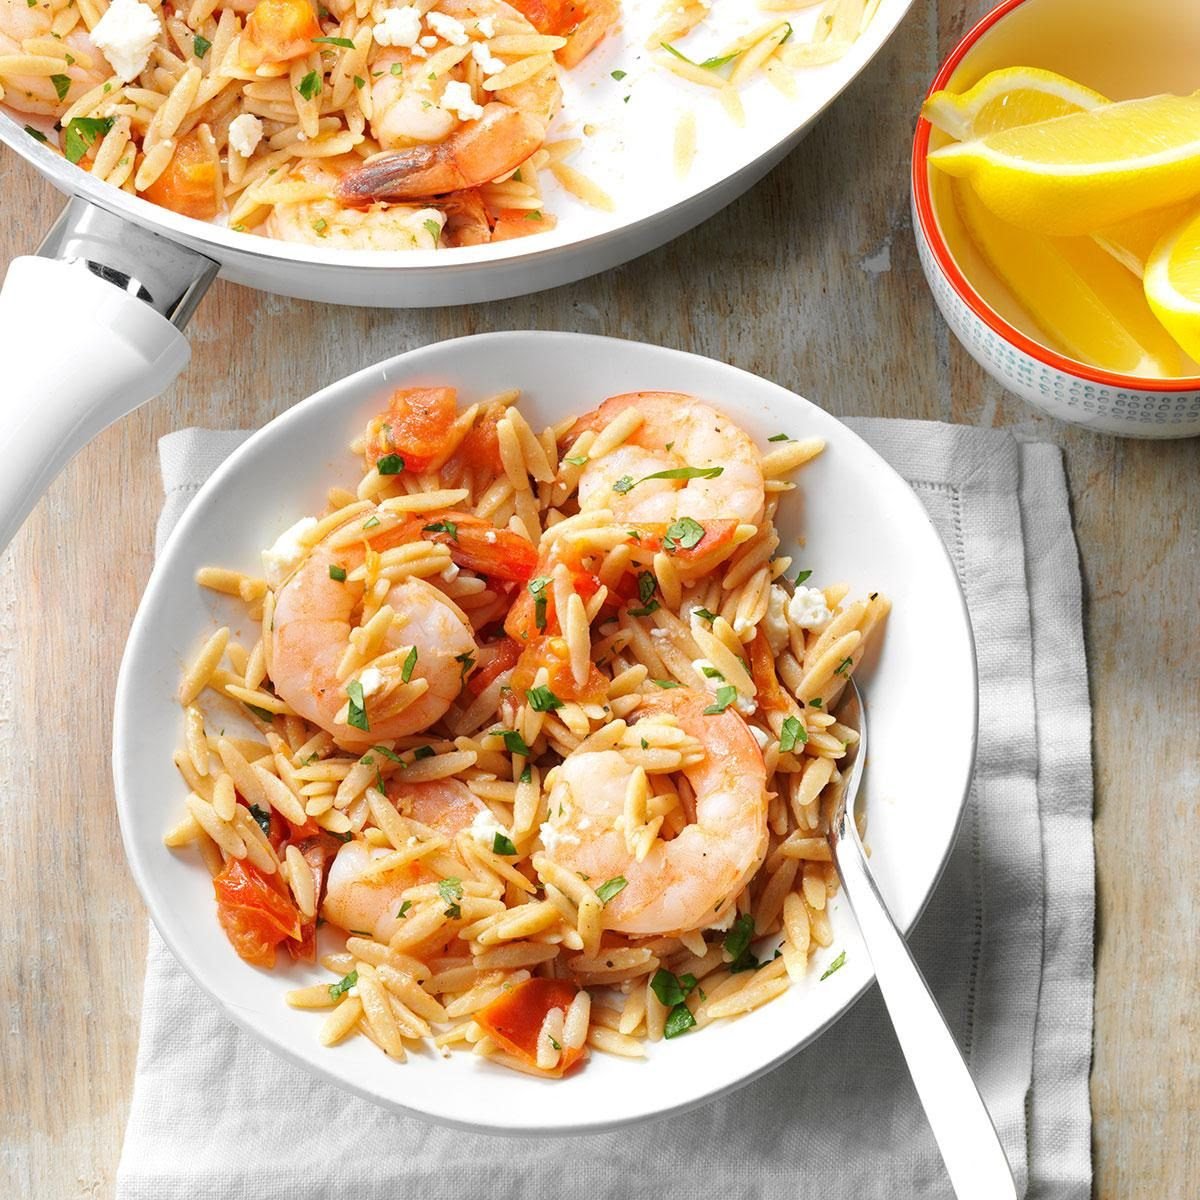 51 Easy & Healthy Dinner Ideas Ready in 30 Minutes
tasteofhome.com/collection/30-…
@tasteofhome